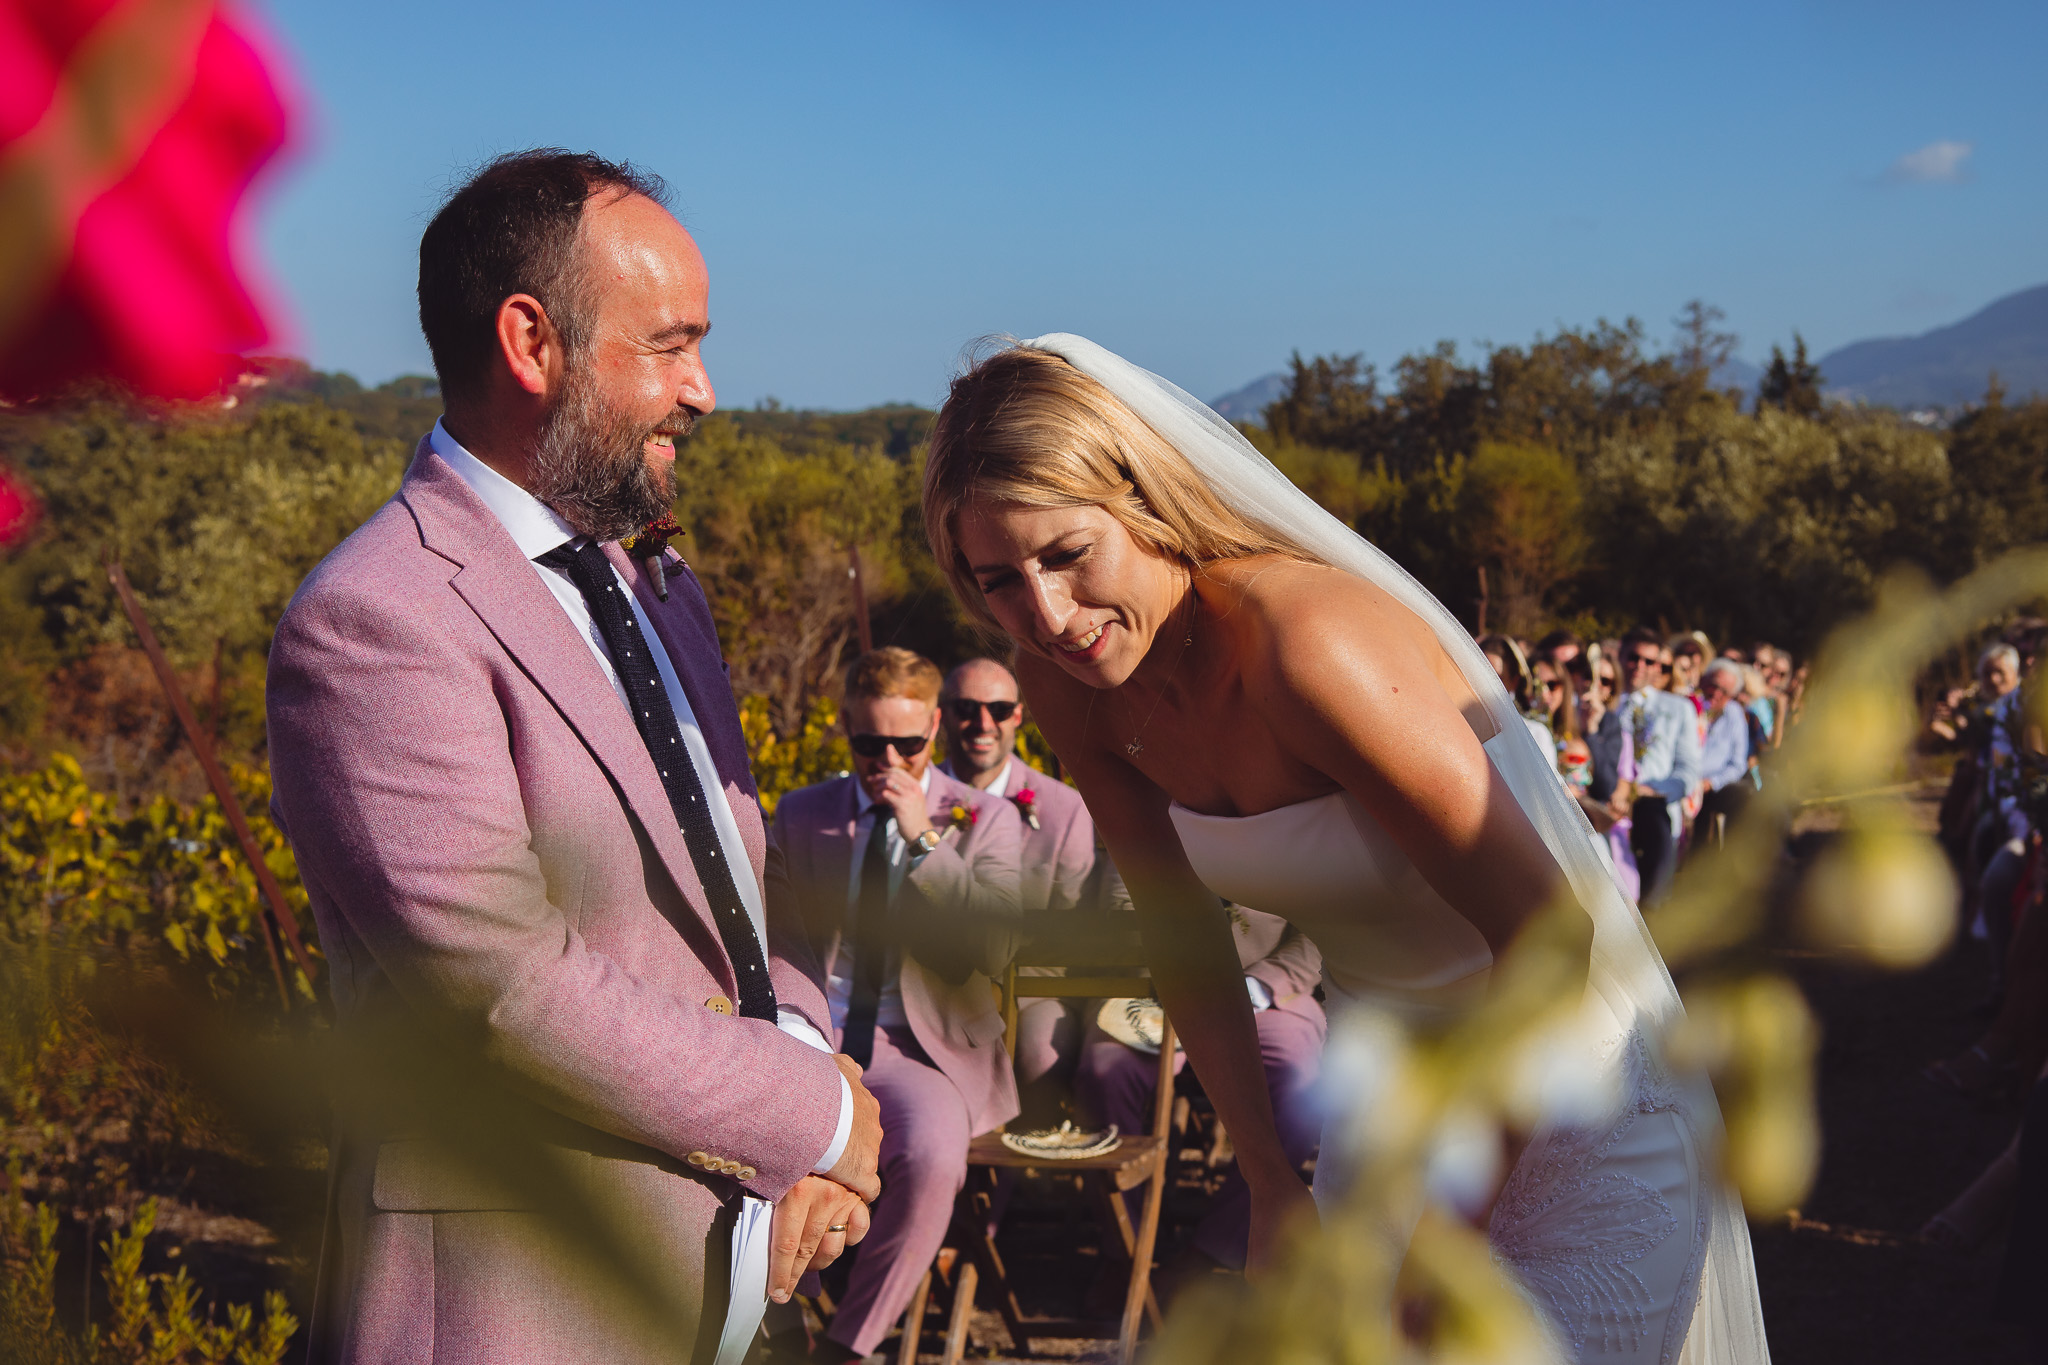 The bride laughs with the groom during their wedding ceremony at Ambelonas Vineyard, Corfu